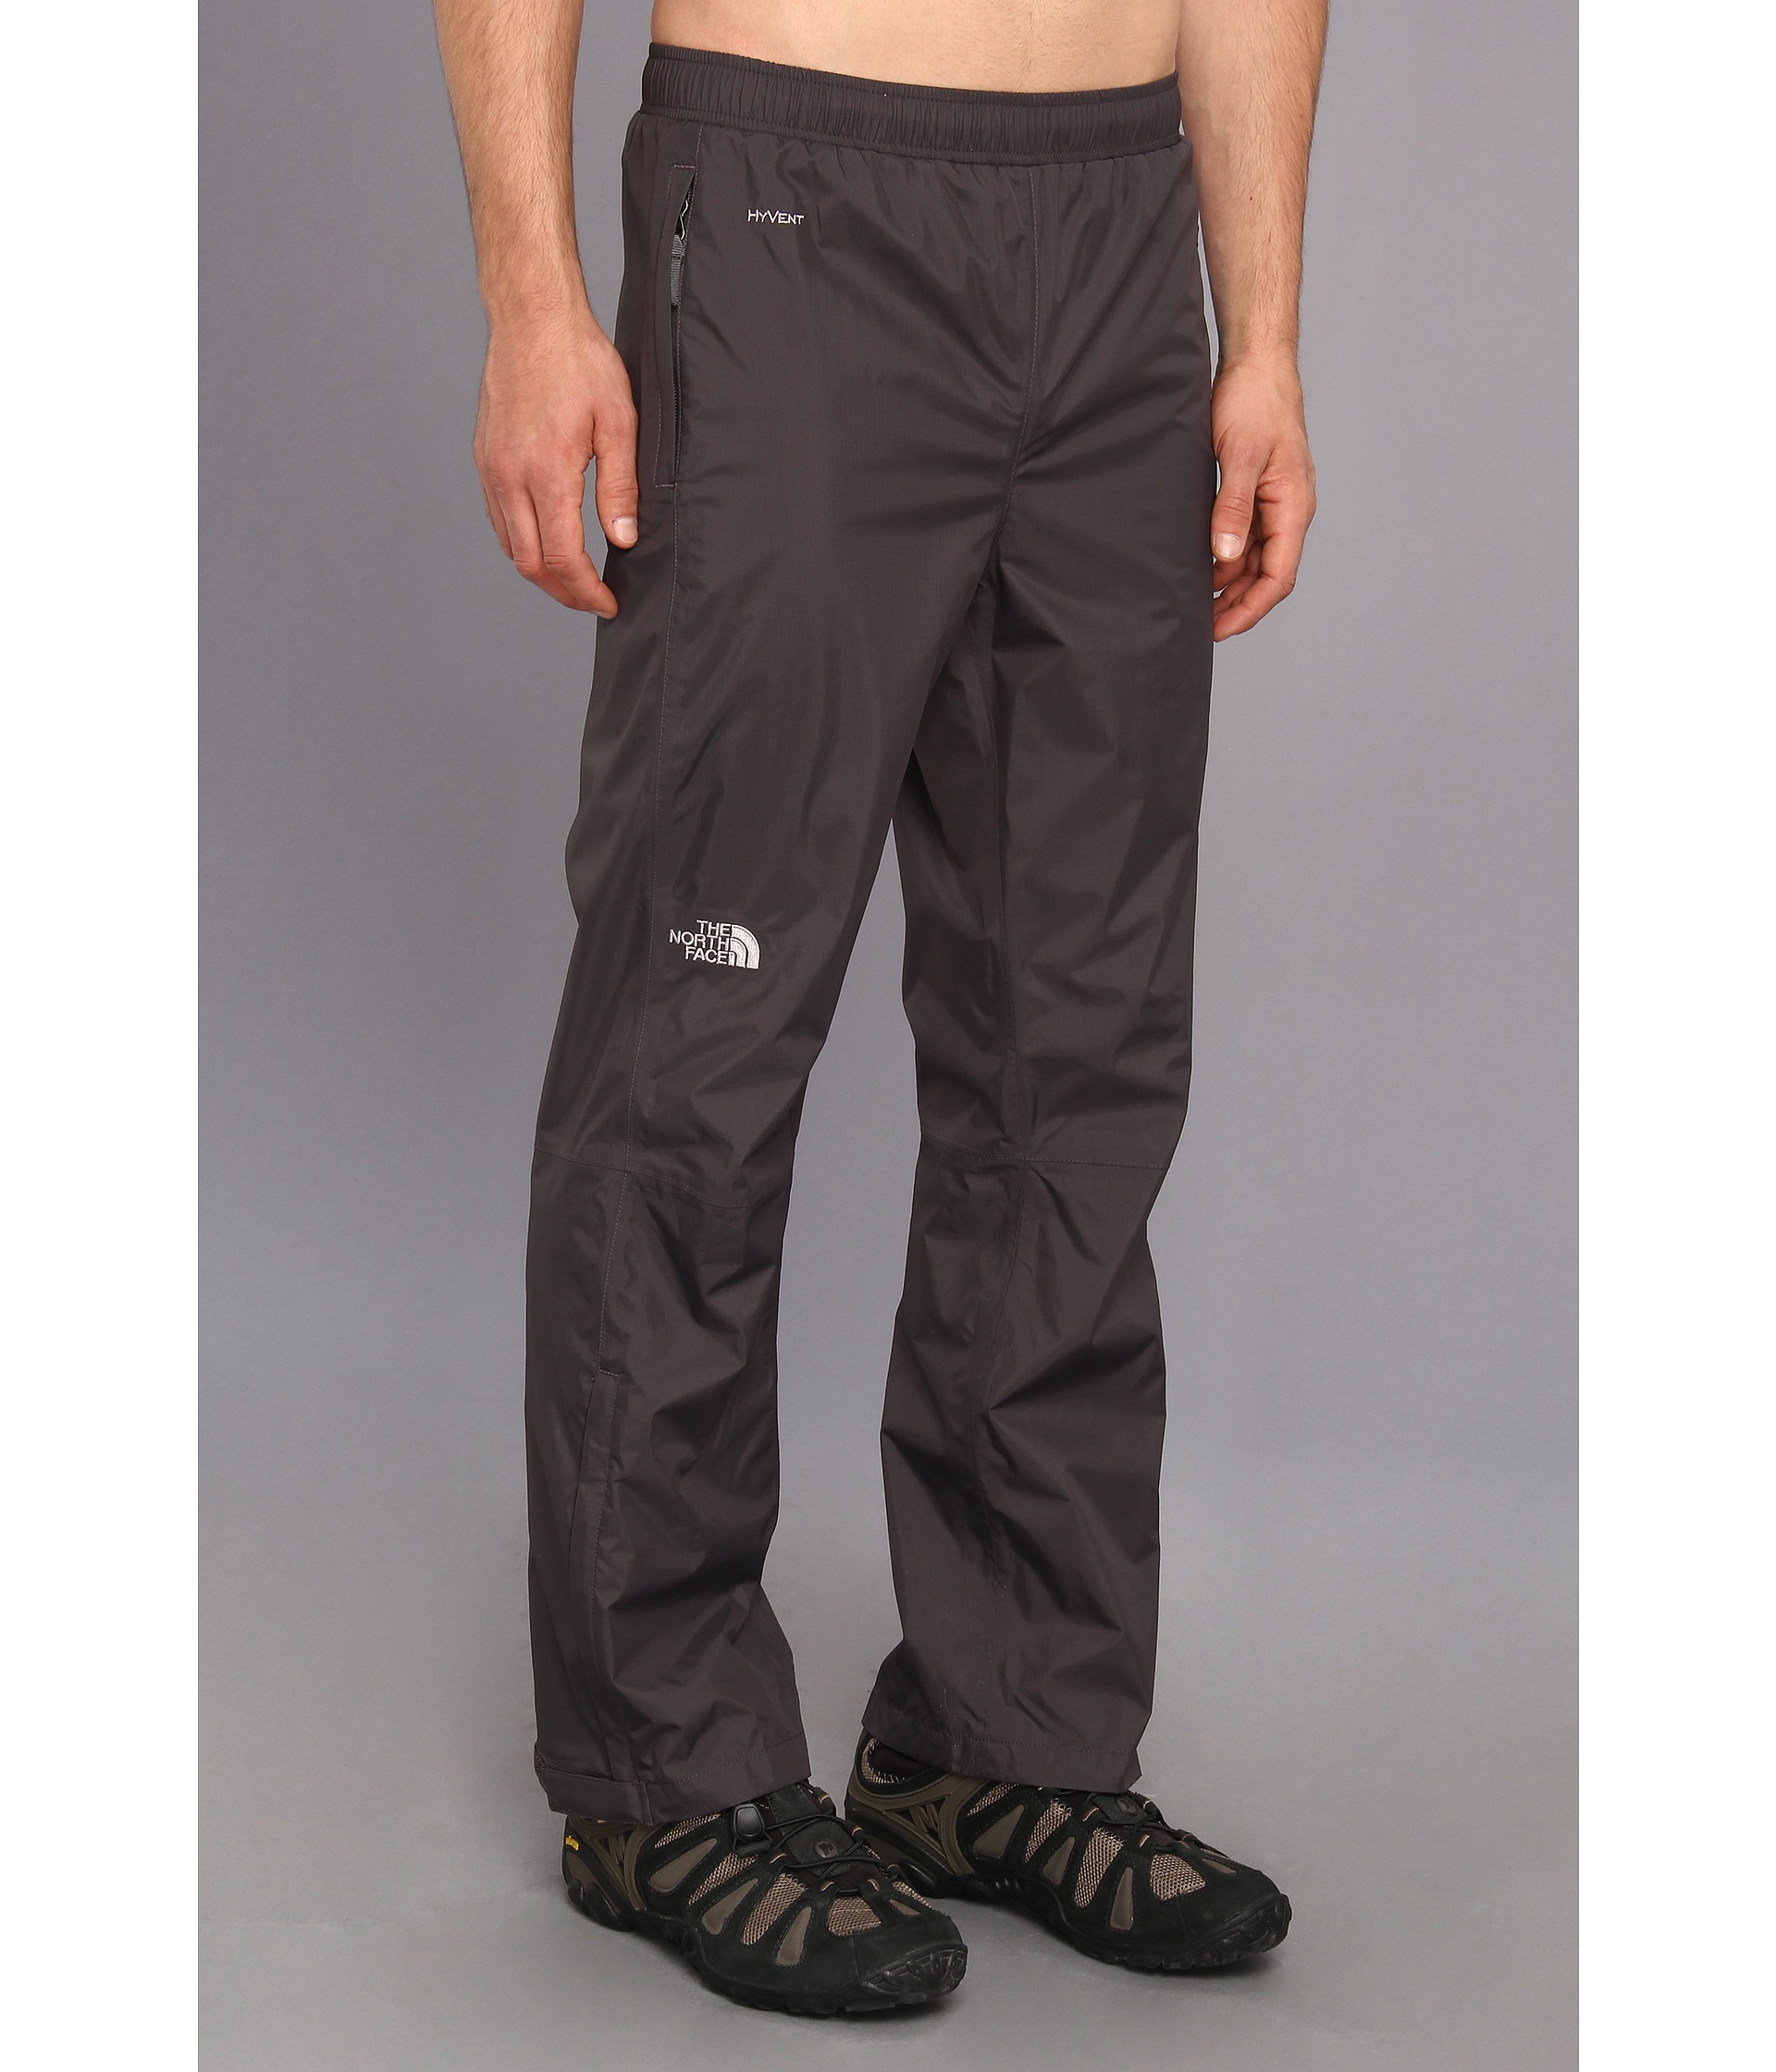 north face resolve pants review